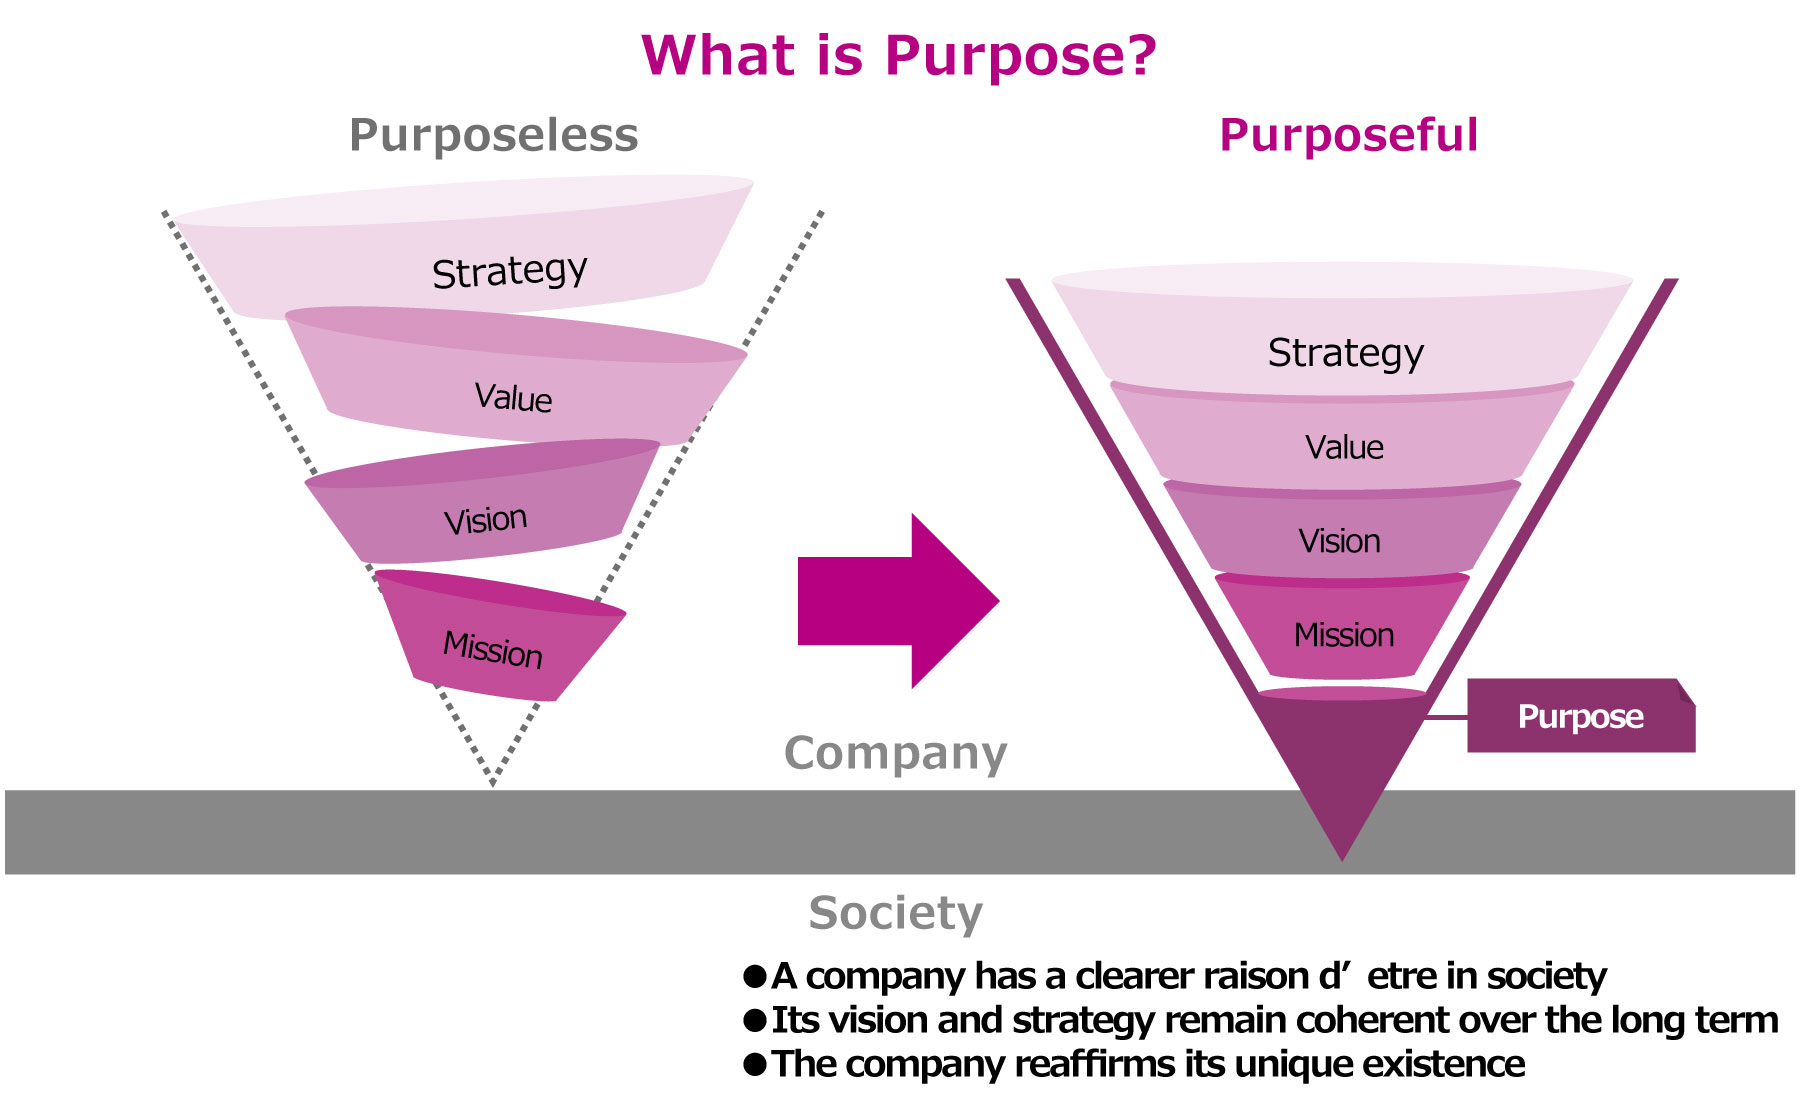 What is corporate purpose?